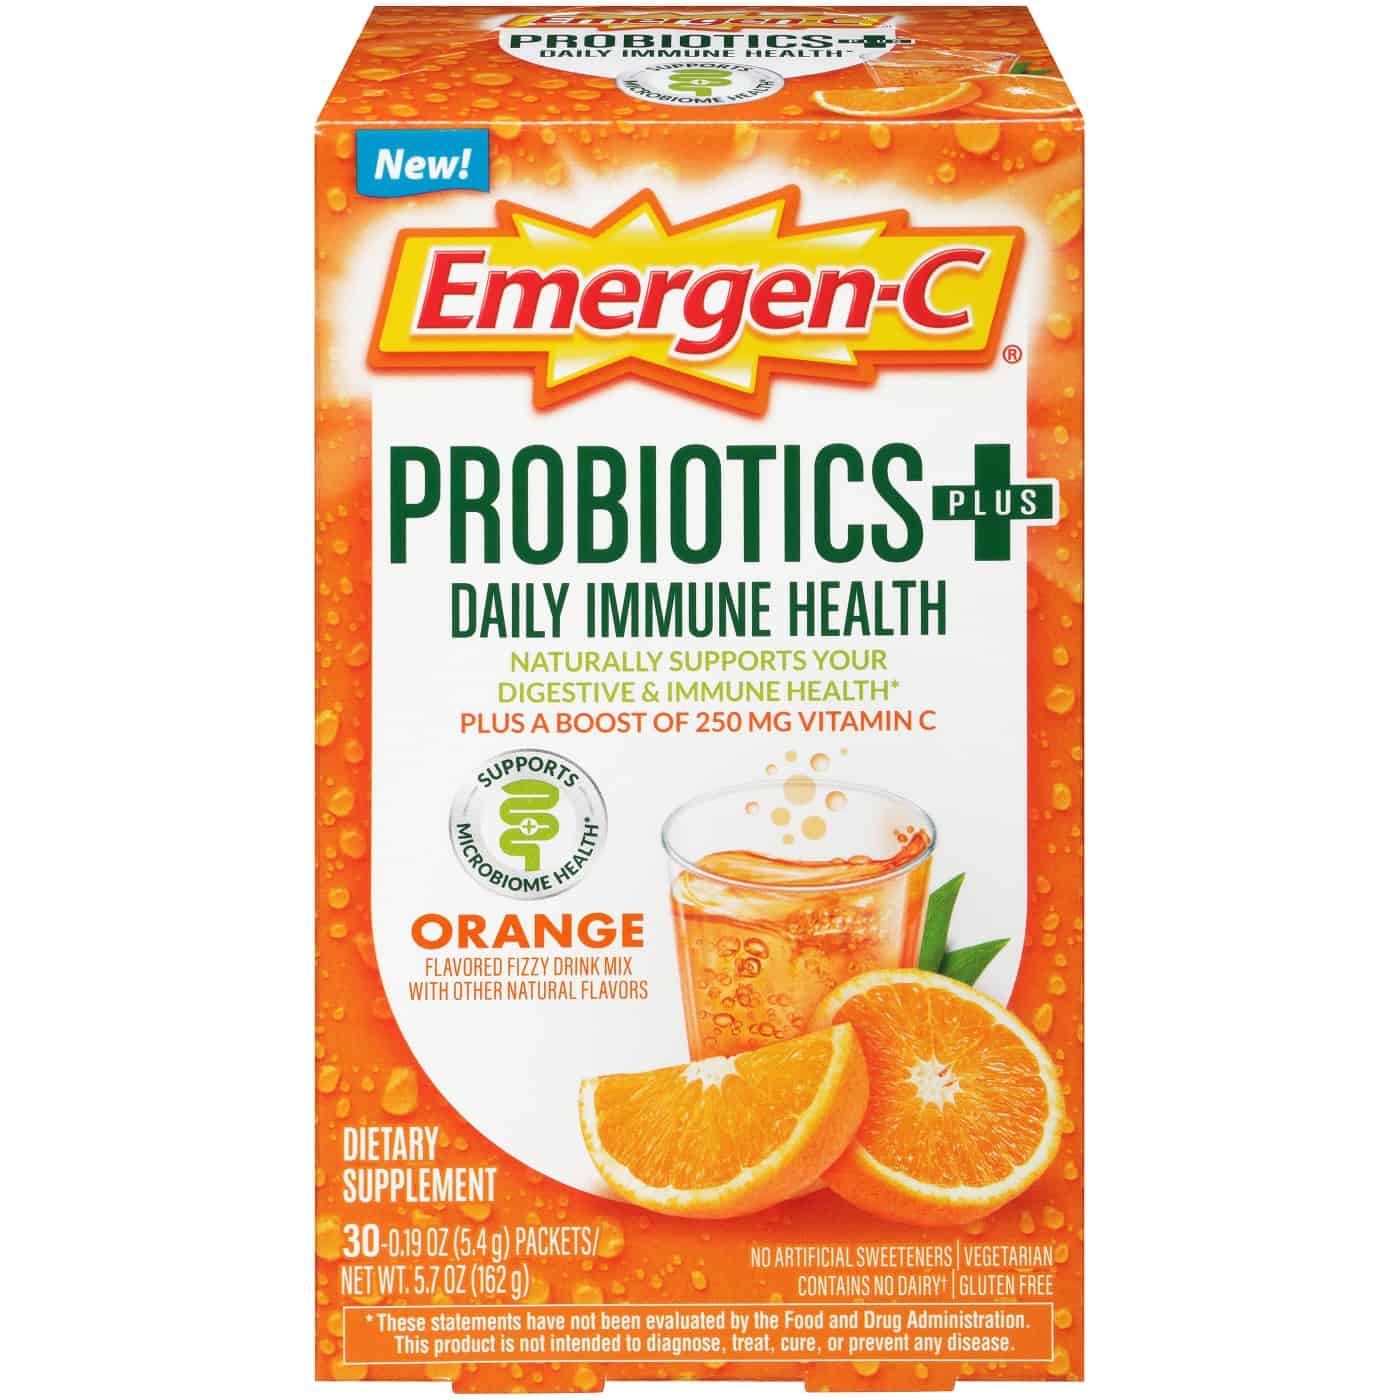 A box of orange flavored probiotics for daily immune health.